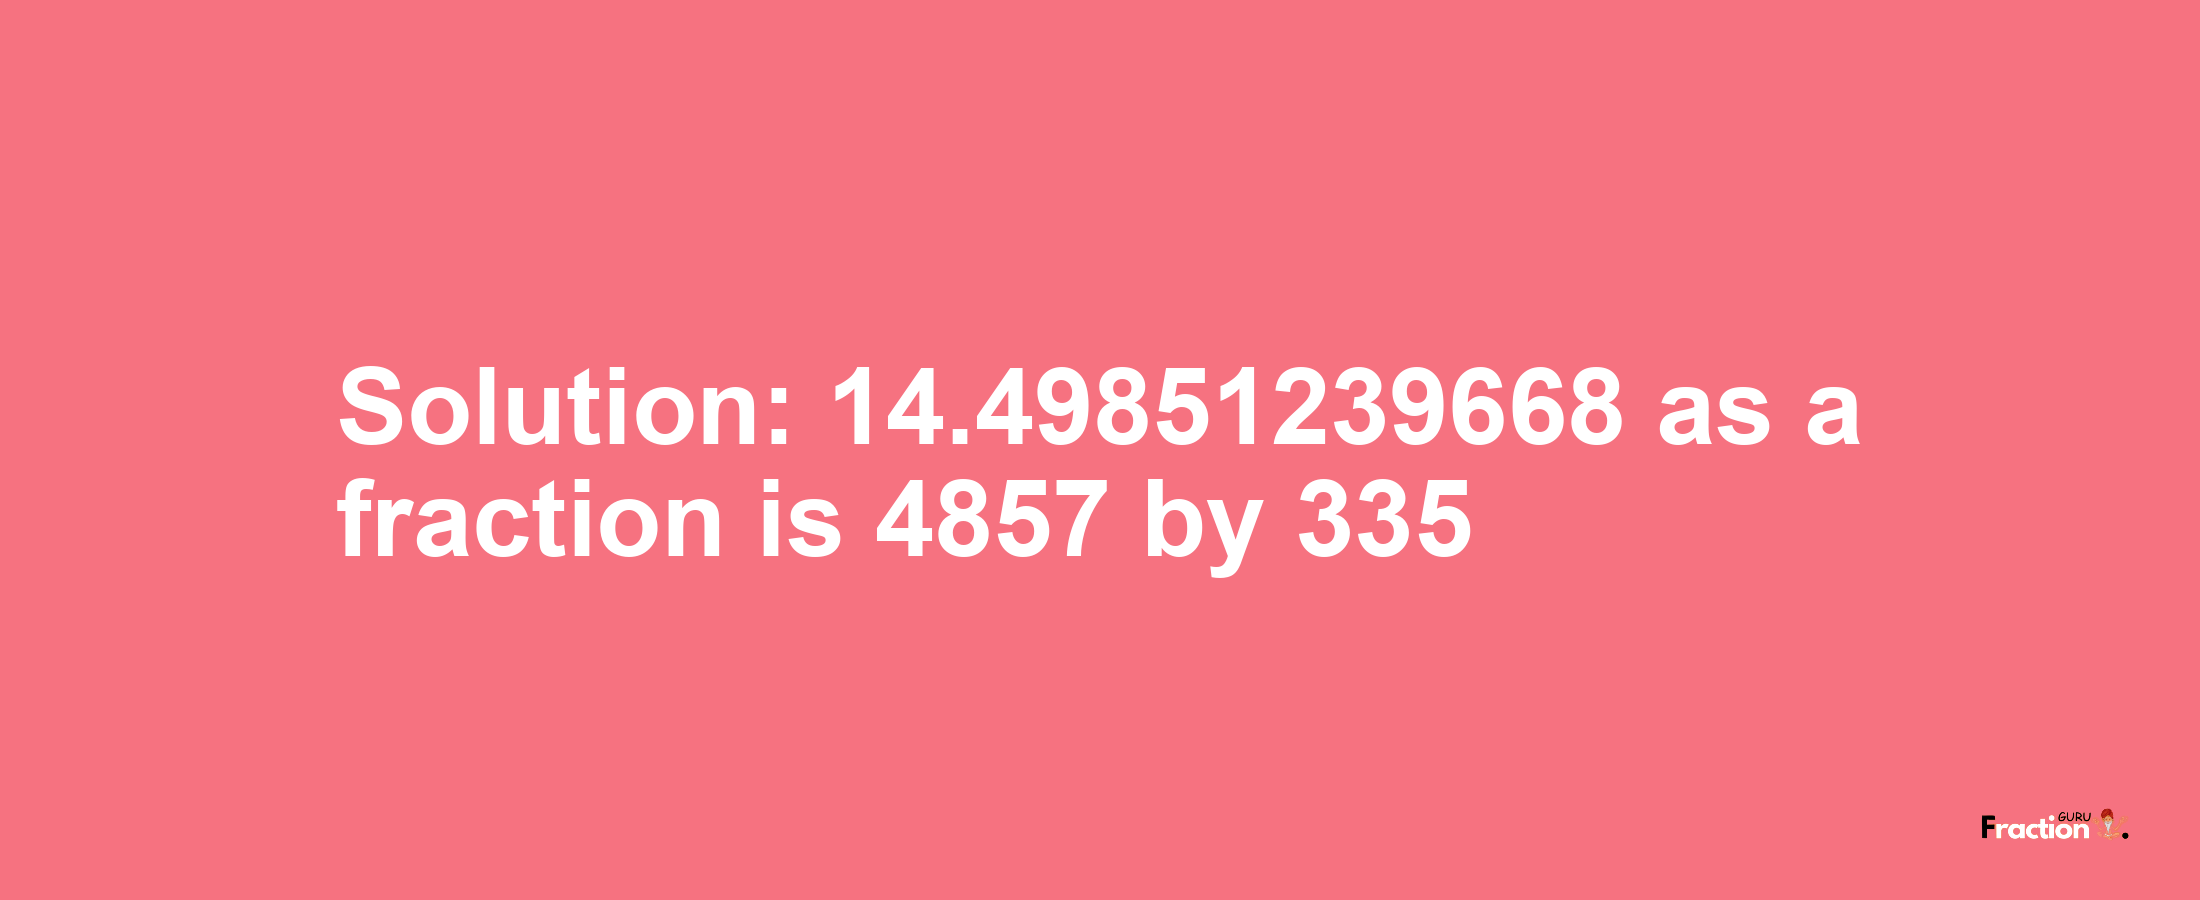 Solution:14.49851239668 as a fraction is 4857/335